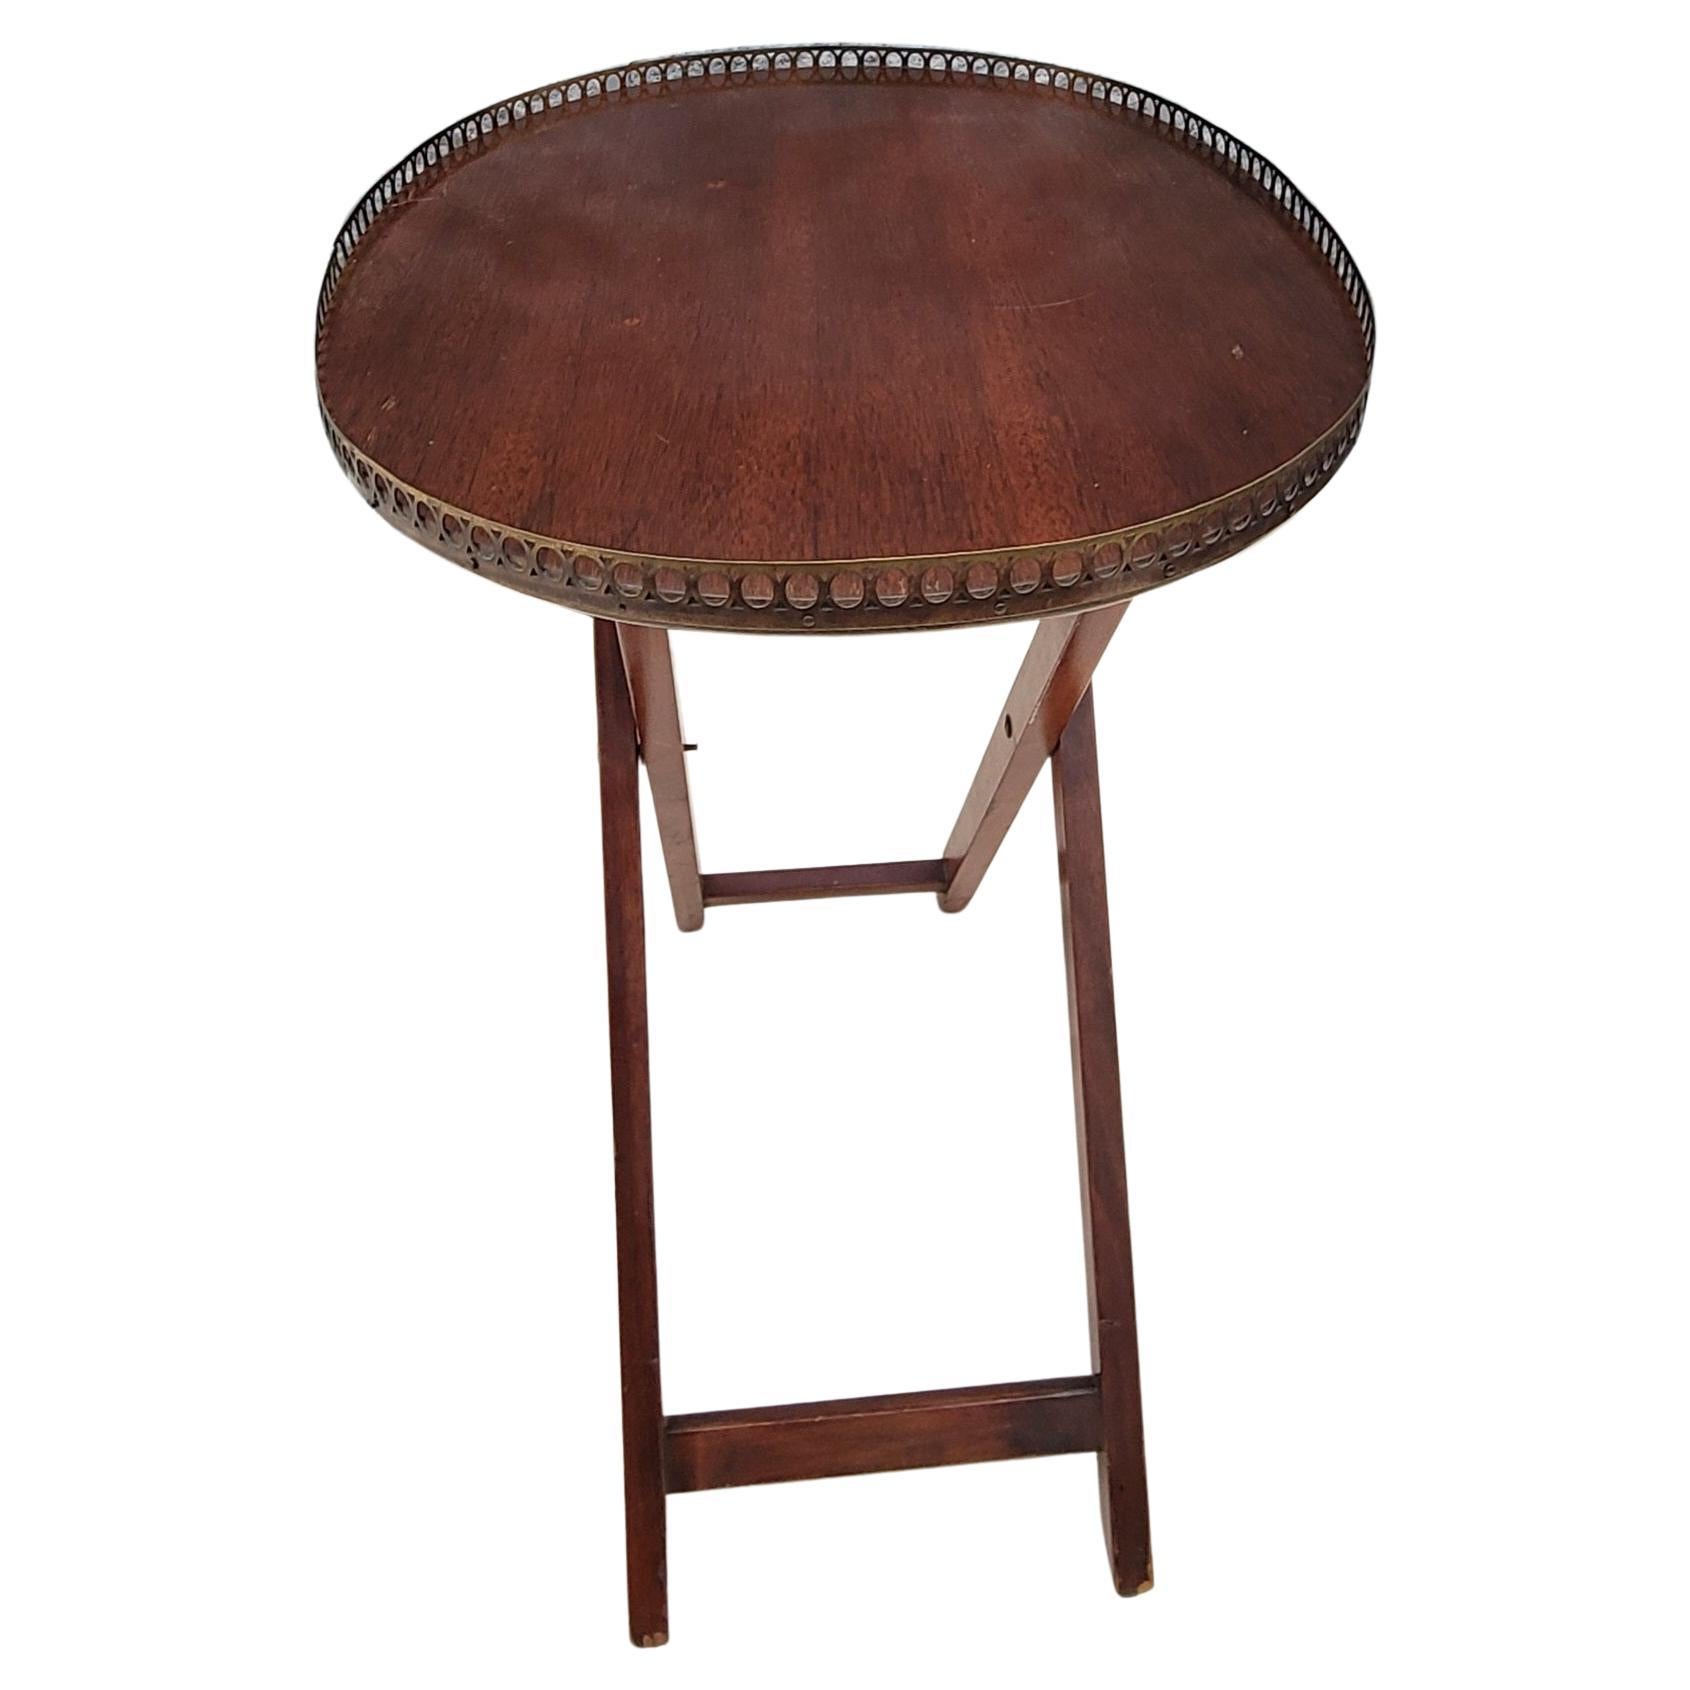 American Mid-Century George III Style Mahogany Folding Tray Table w/ Gallery, Circa 1950s For Sale